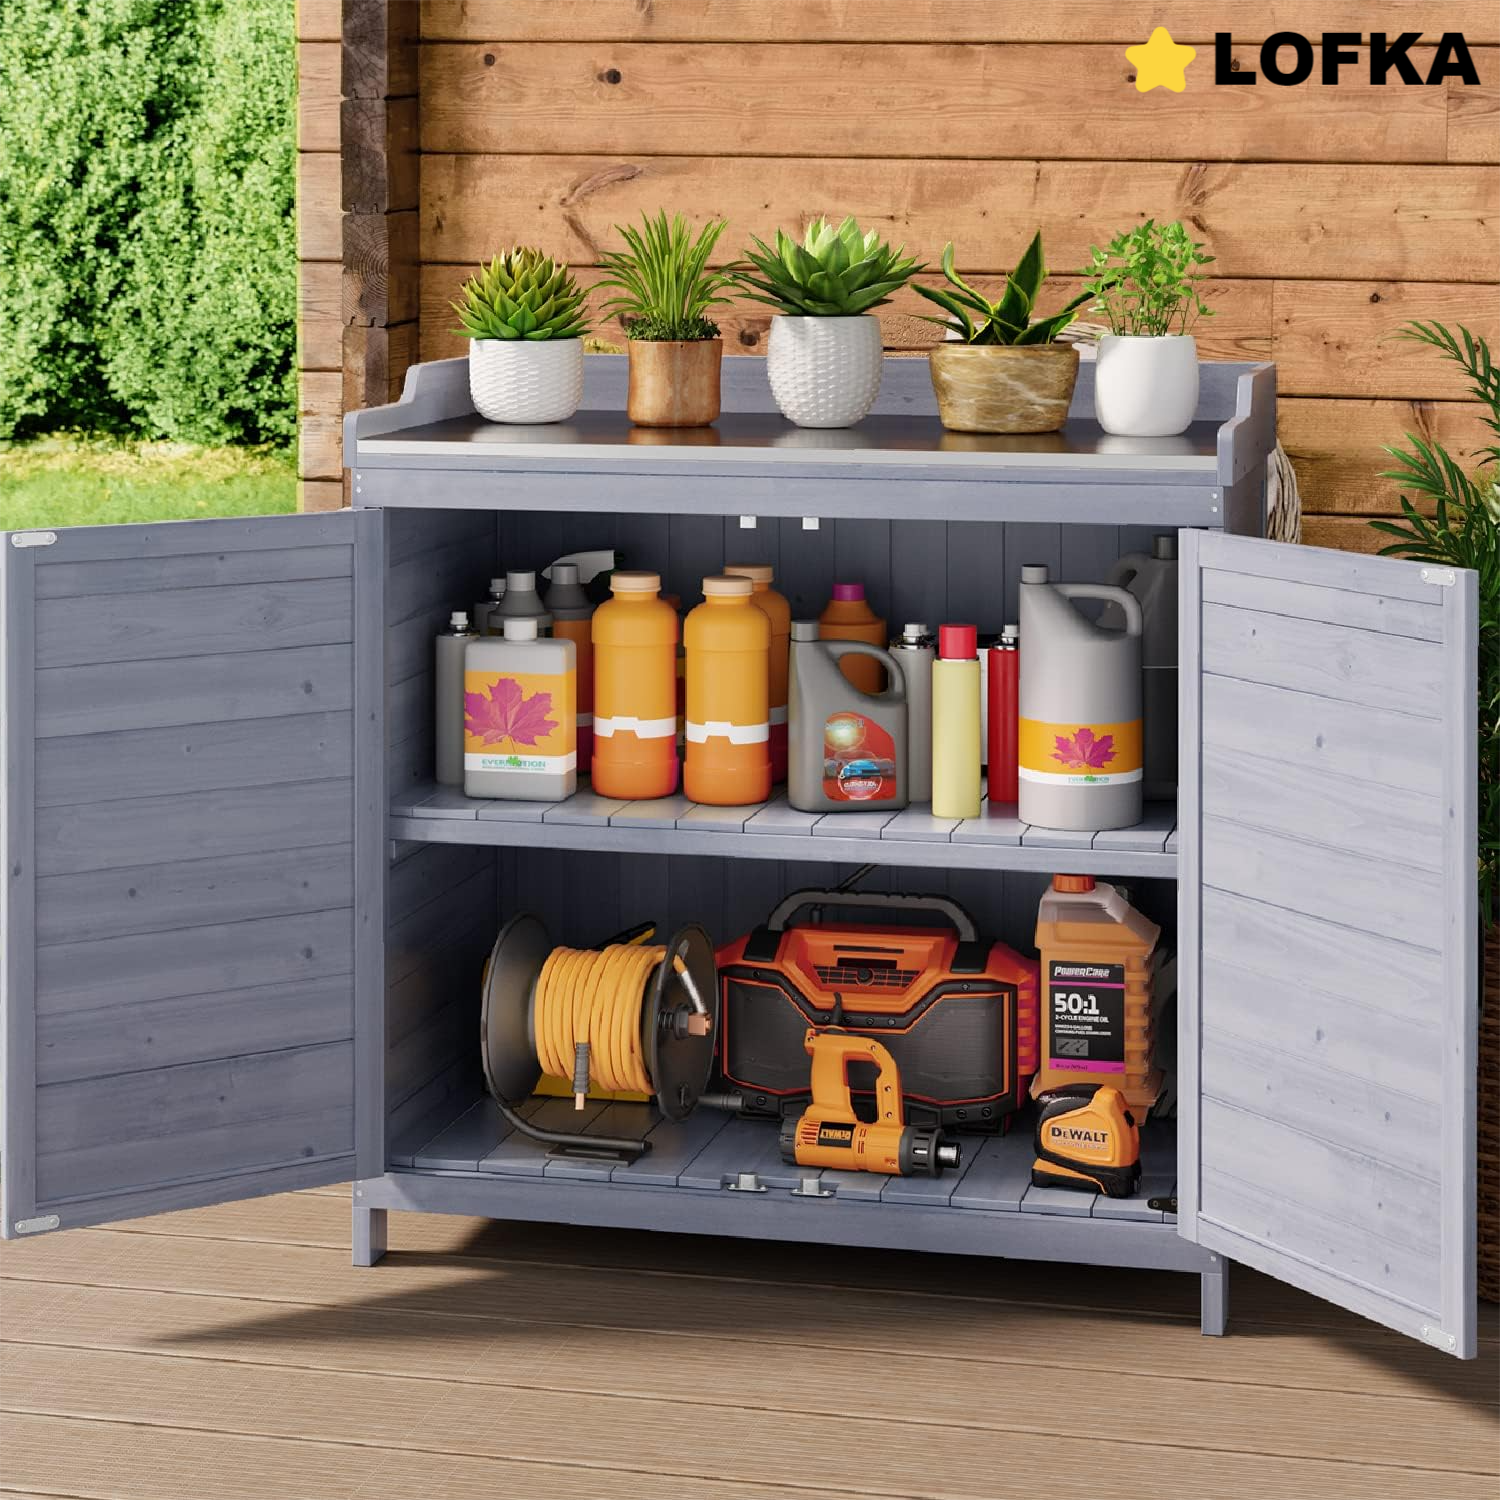 Lofka Outdoor Garden Patio Wooden Storage Cabinet with Potting Benches, Gray - image 1 of 8